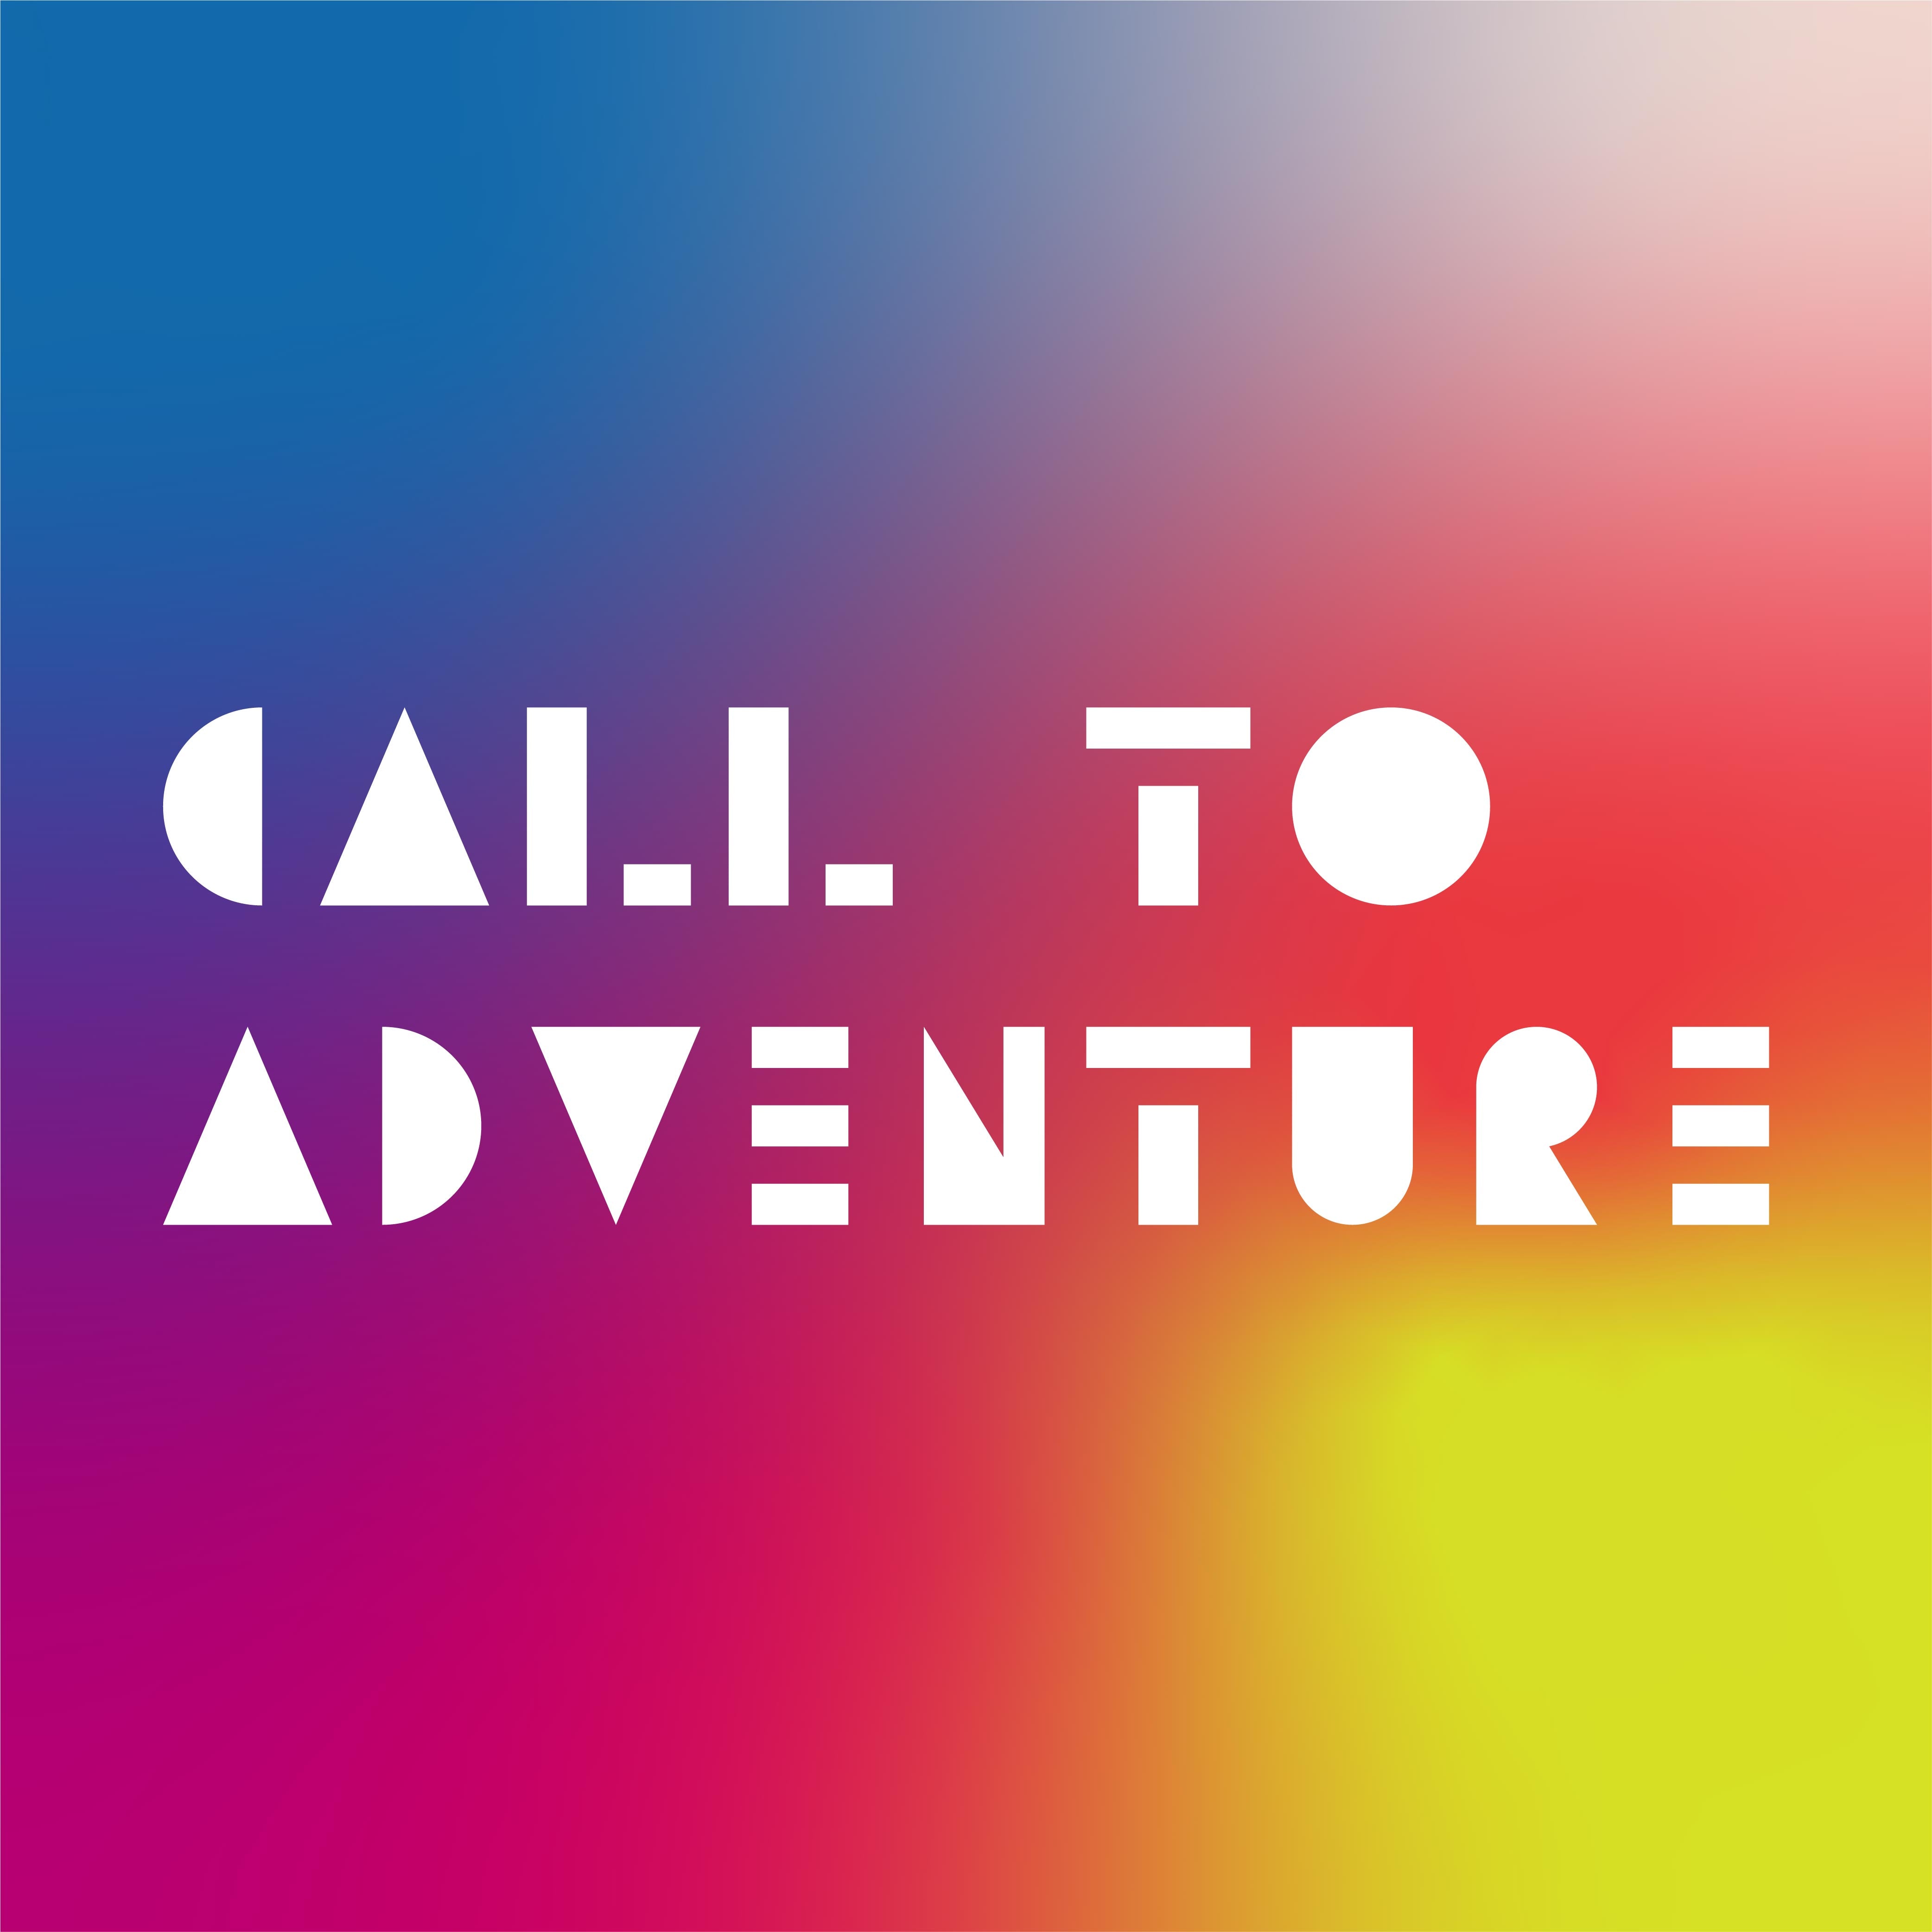 Call to Adventure: <br>A personal endurance challenge